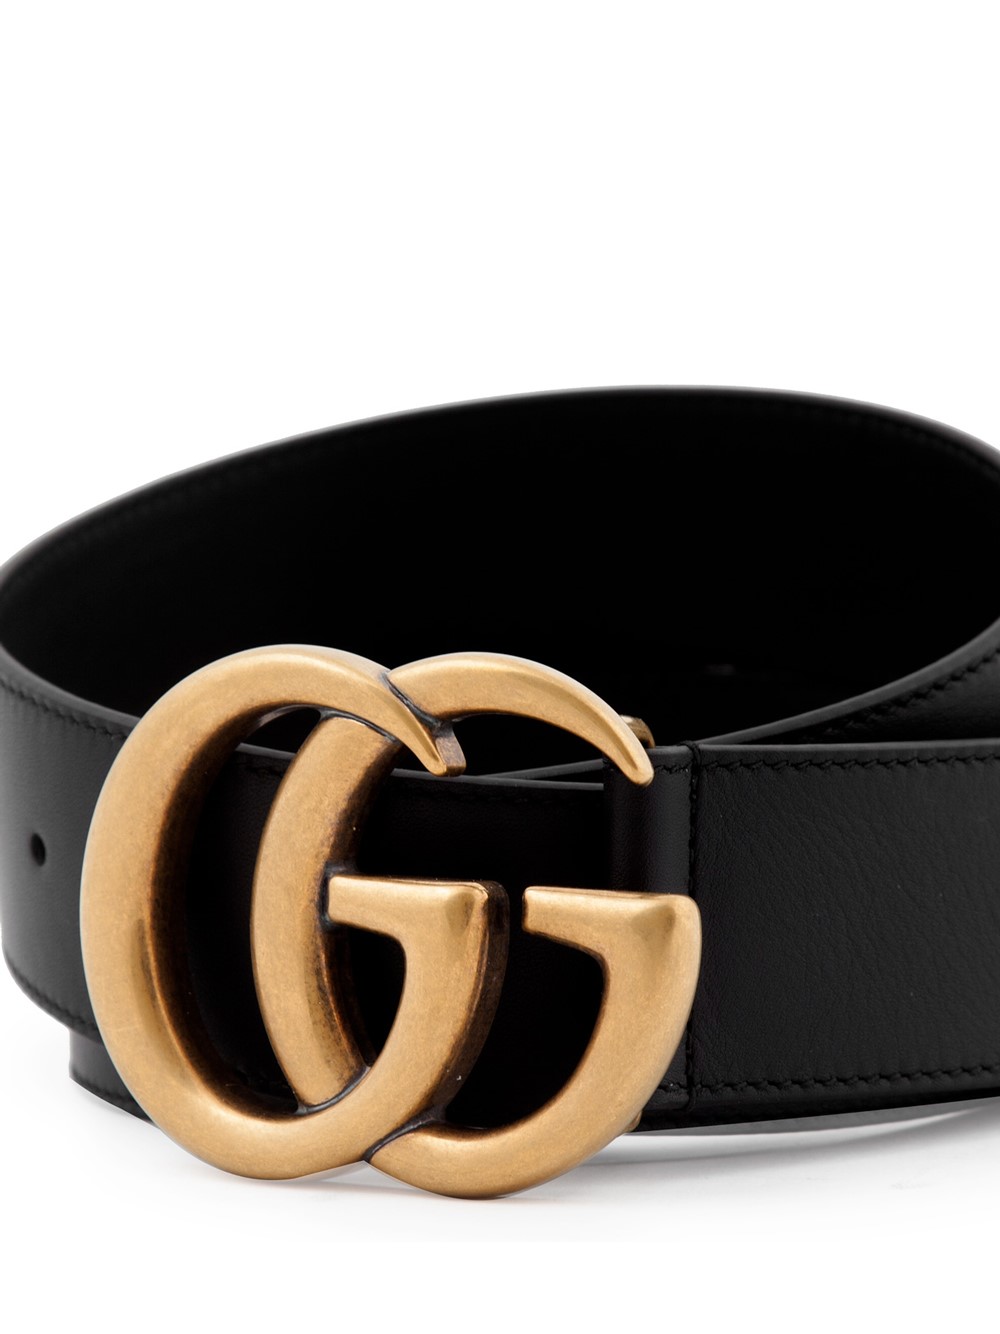  gucci  GG MARMONT  BELT  available on montiboutique com 28984